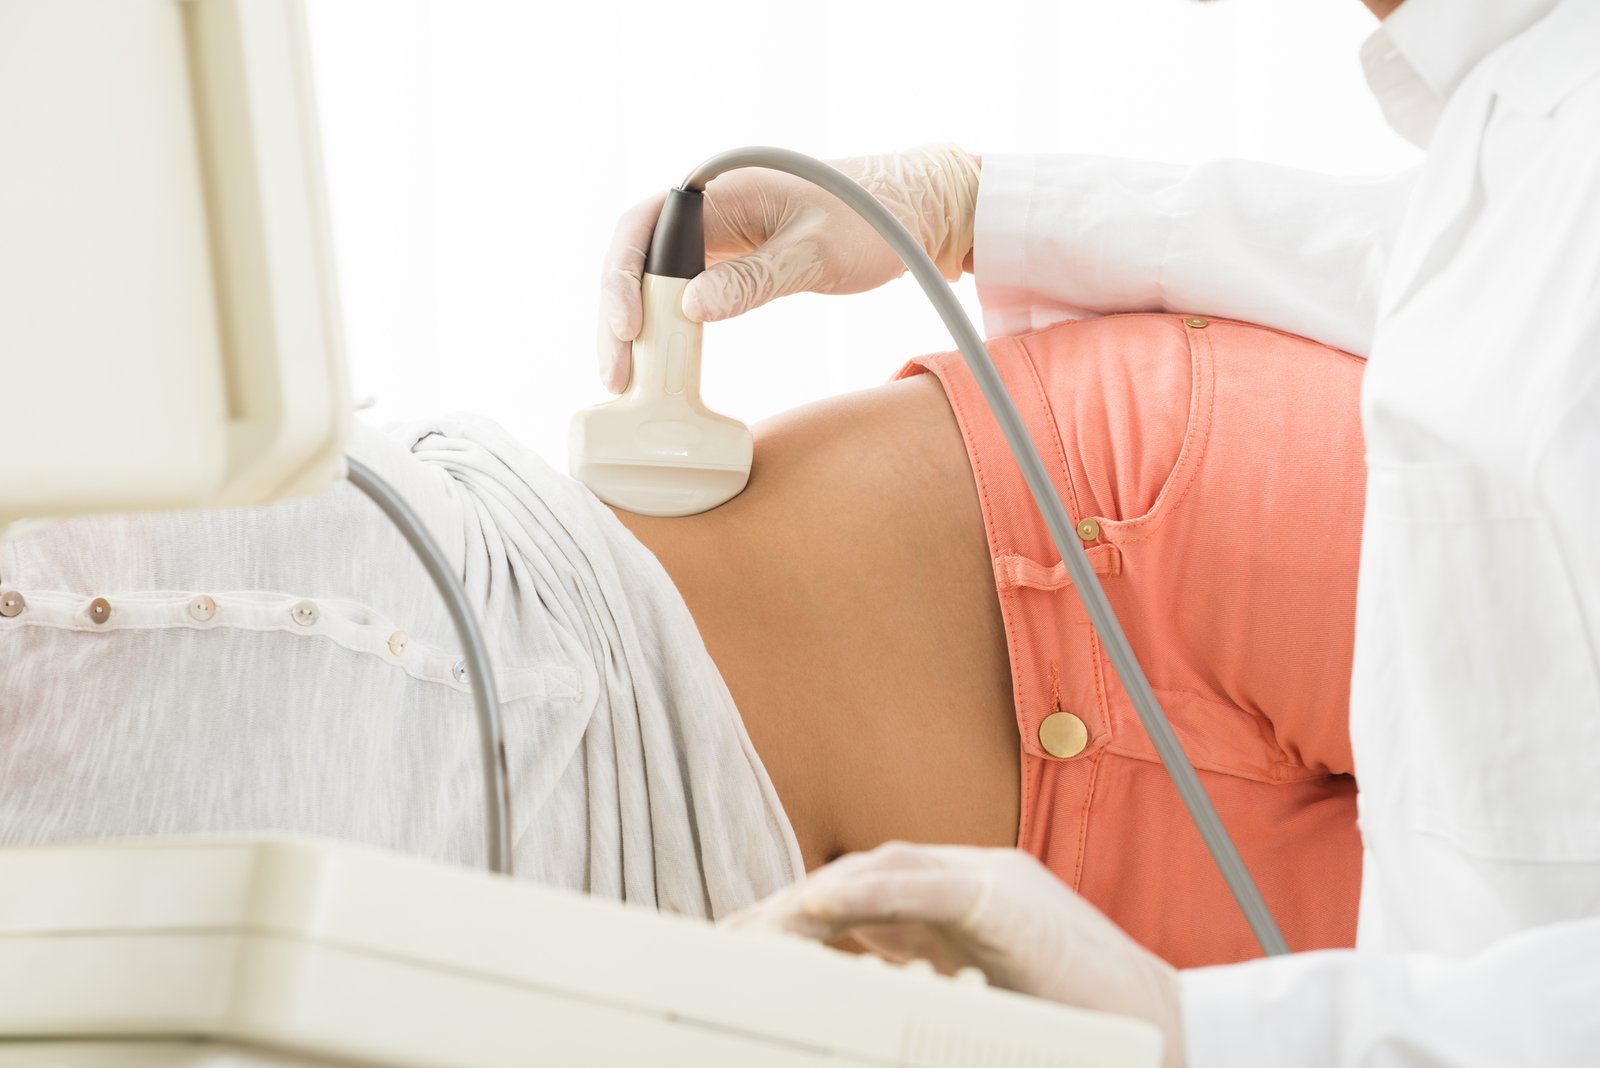 Doctor Is Using Ultrasound Machine To Scan Women's Abdomen In The Clinic